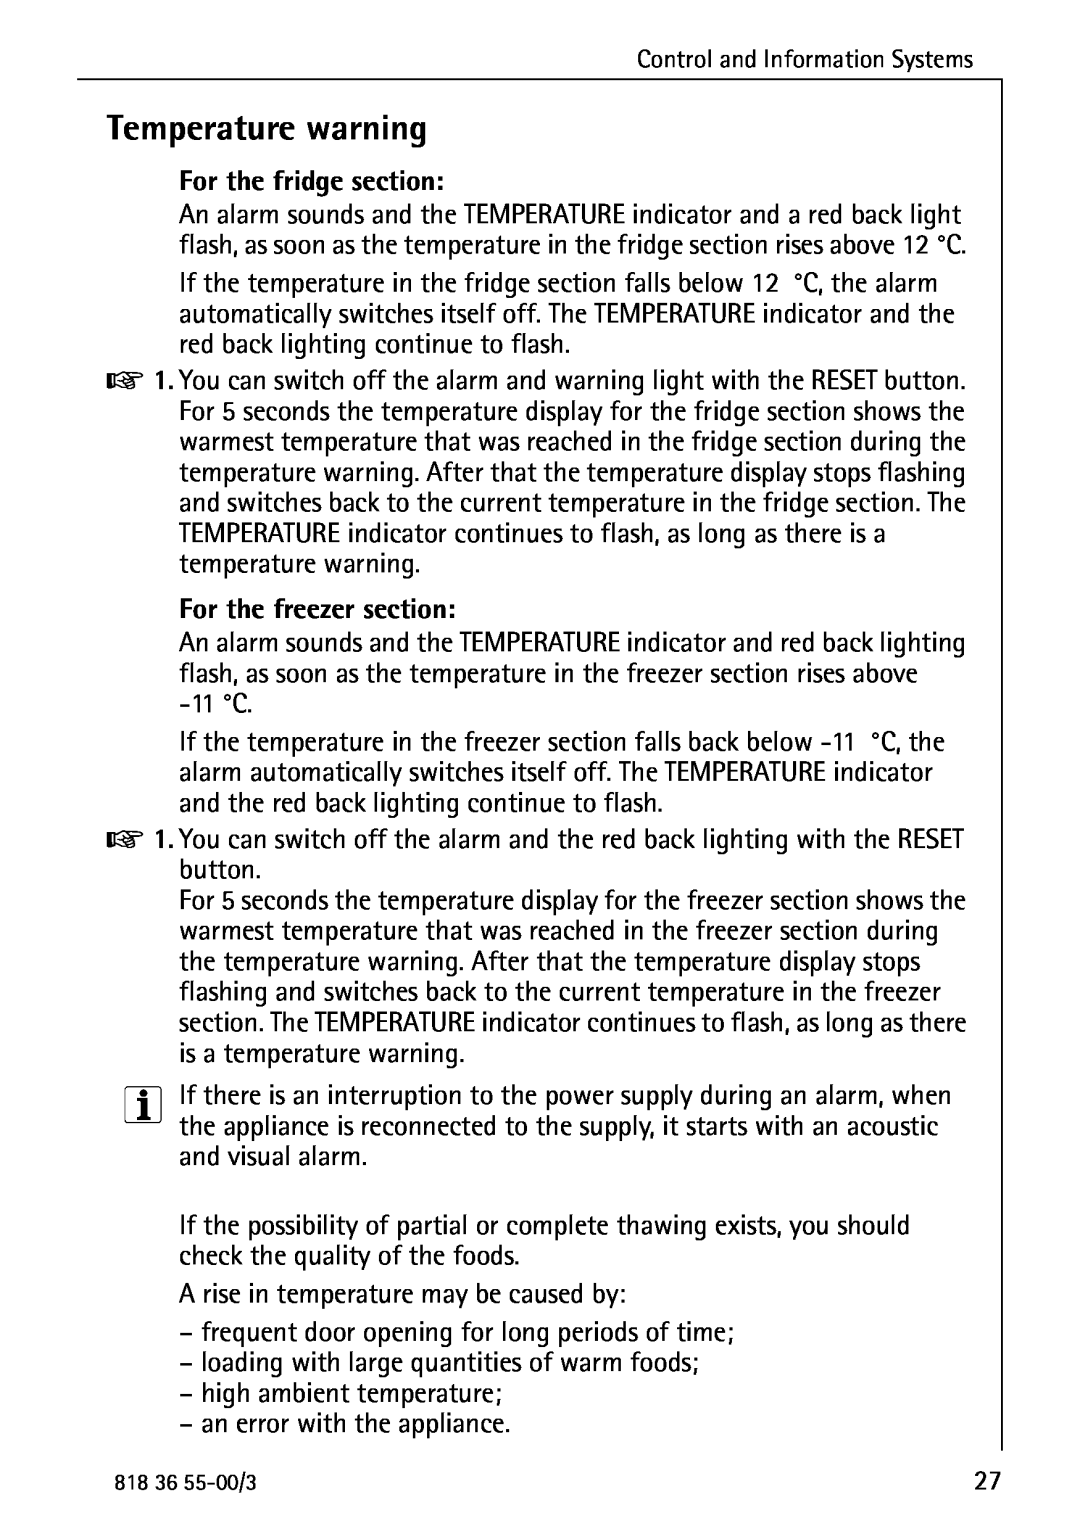 AEG 86378-KG operating instructions Temperature warning, For the fridge section, For the freezer section 